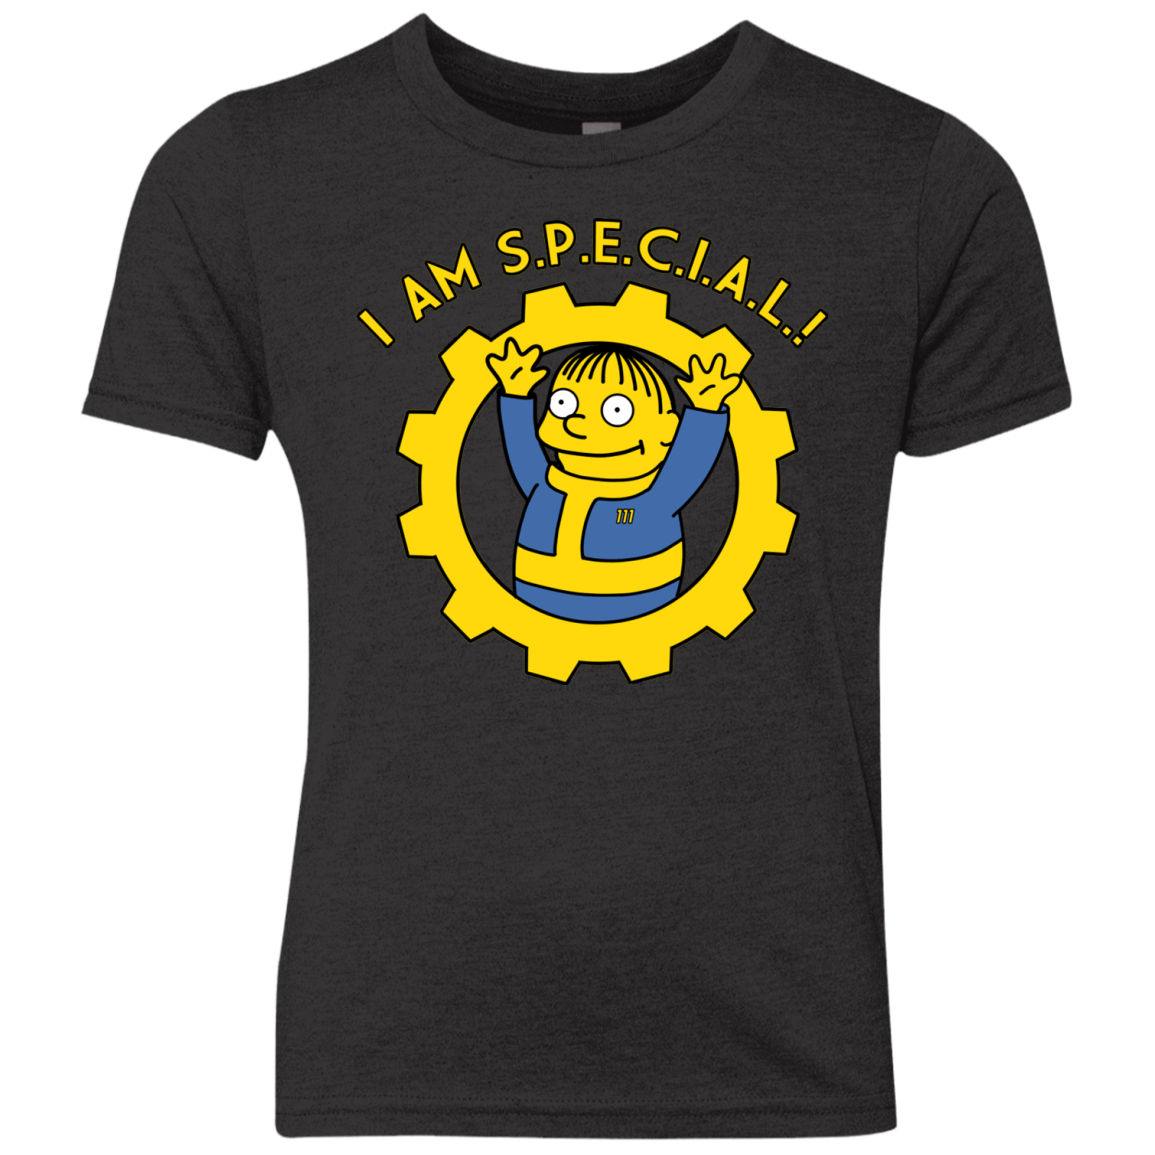 I am special Youth Triblend T-Shirt